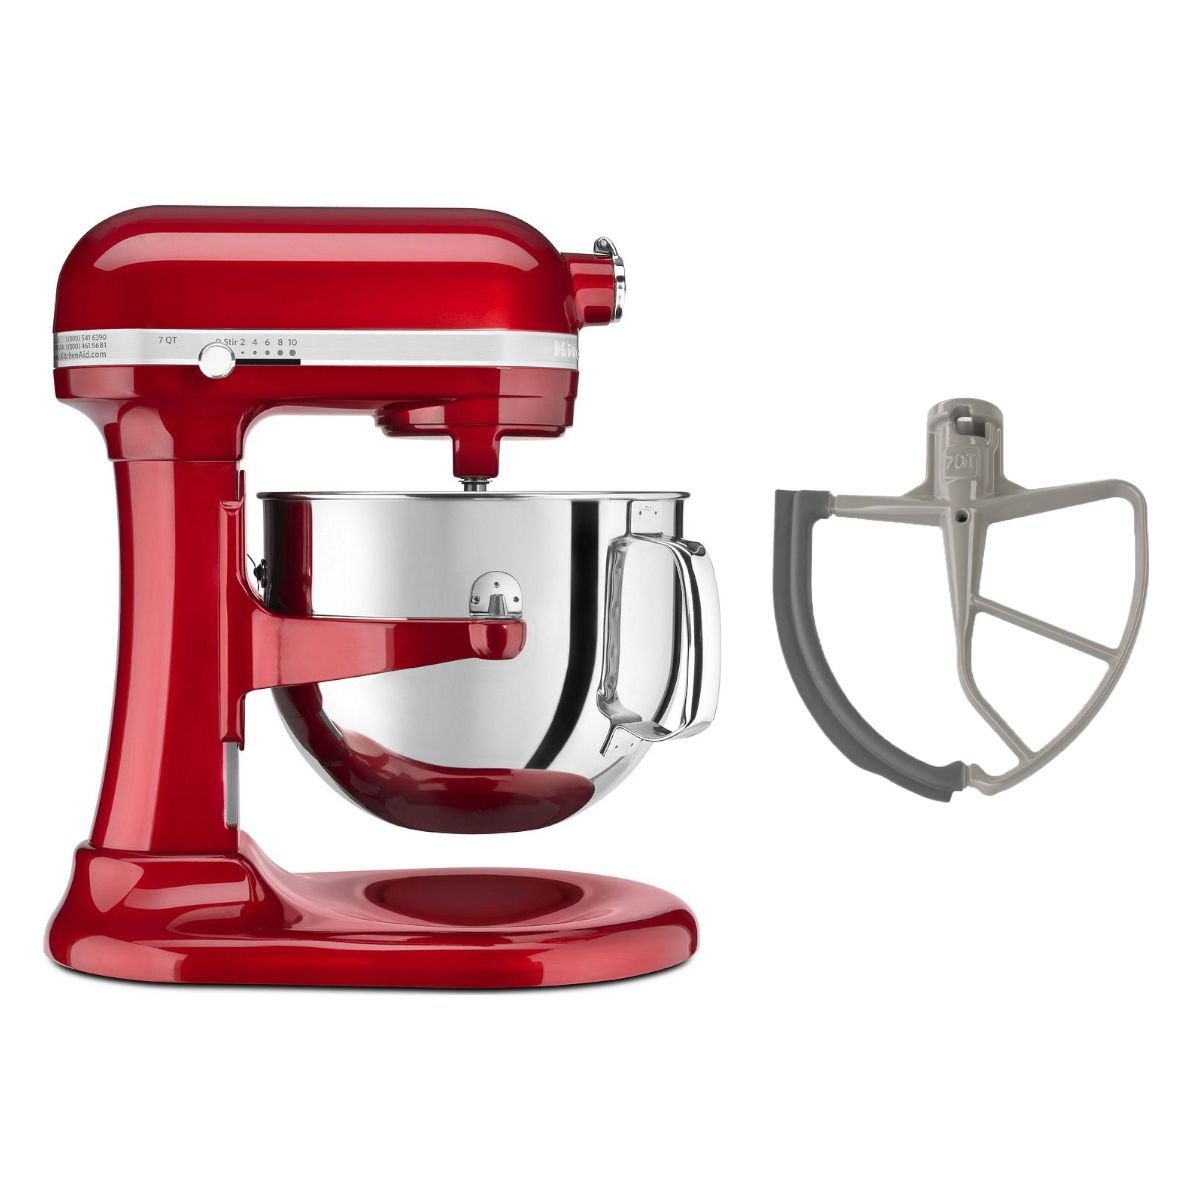 Omkreds Kommerciel Inspicere 7-Quart Pro Line Bowl-Lift Stand Mixer - Candy Apple Red + Flex Edge Beater  | KitchenAid | Everything Kitchens